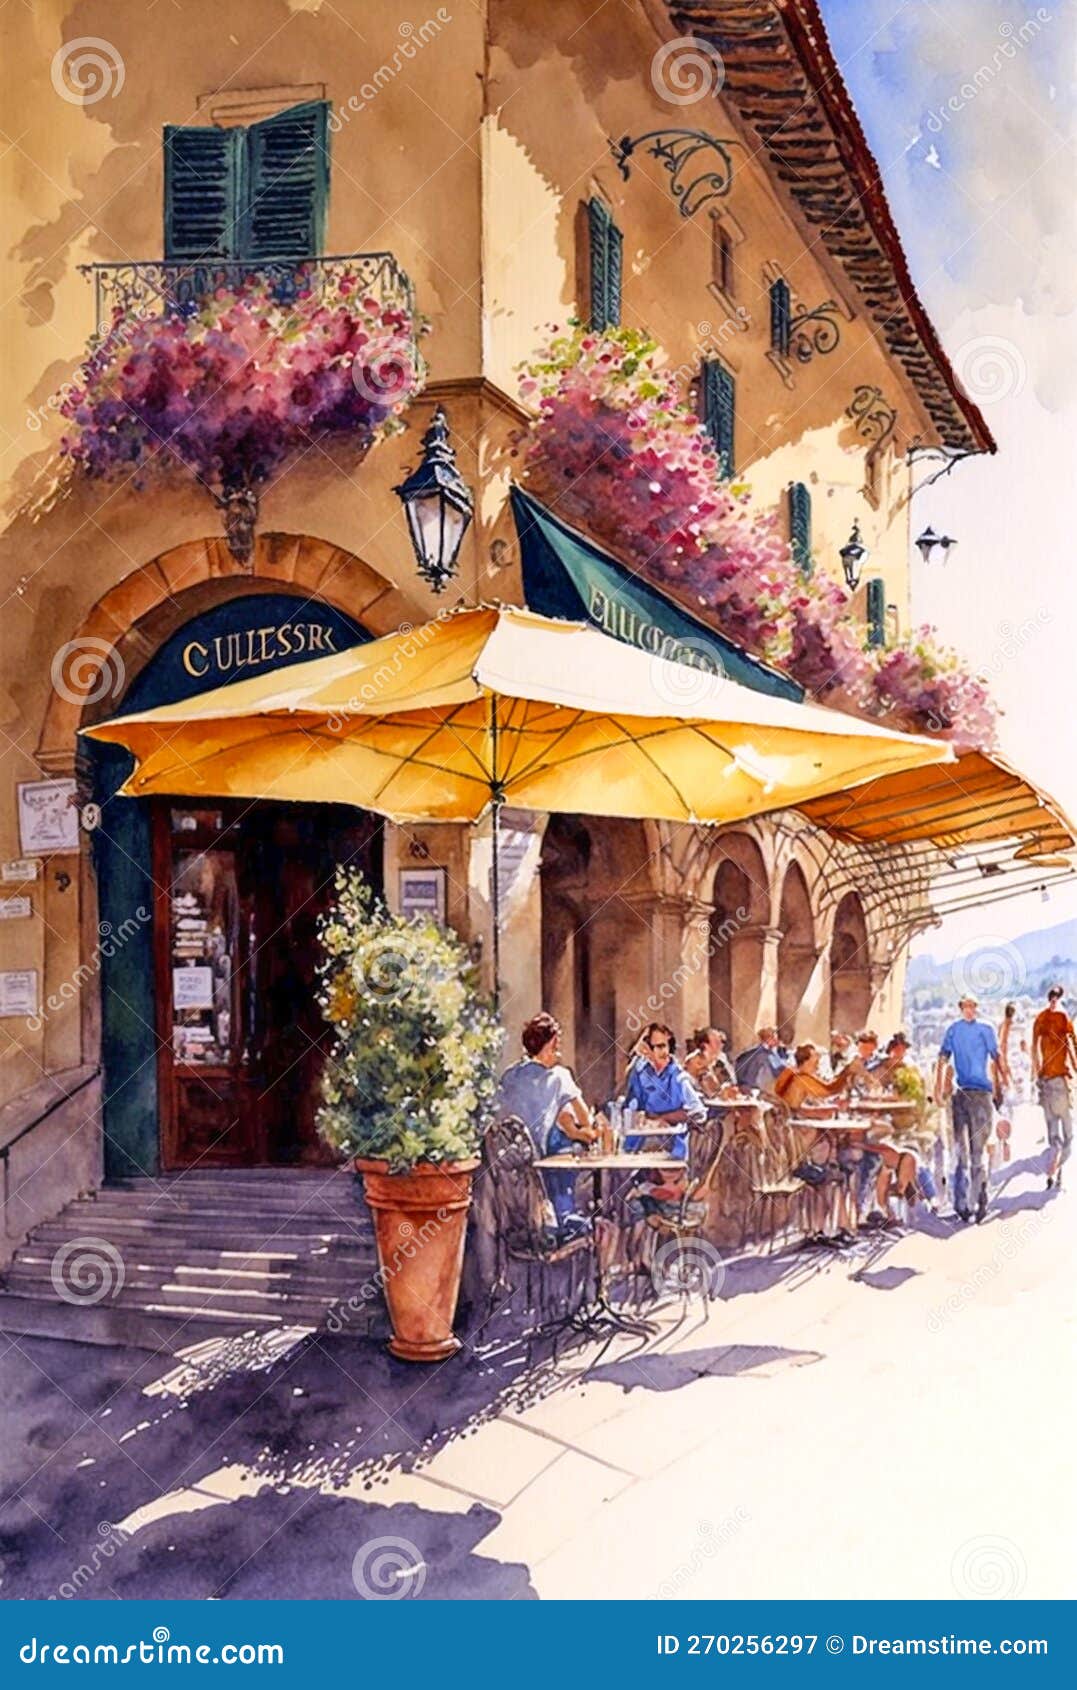 sidewall restauran with people in summer sunny day, digital watercolor painting